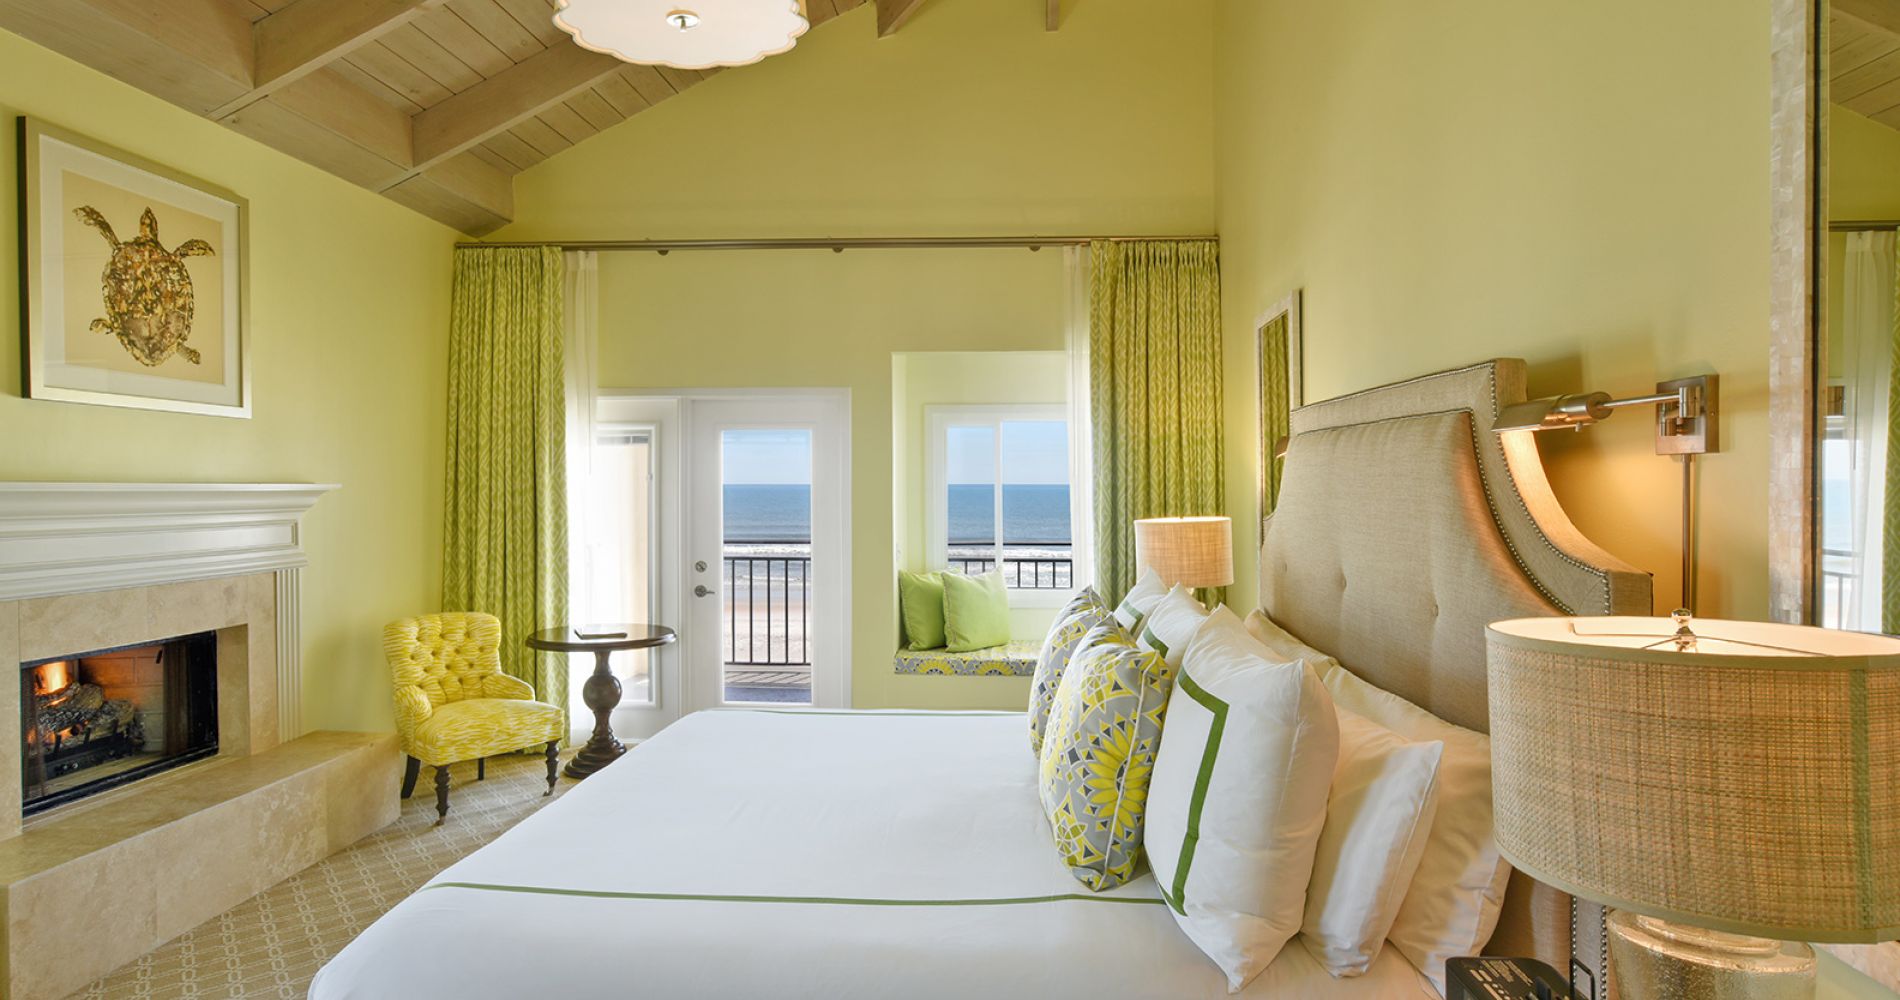 Oceanfront king bed suite with yellow-green walls and furniture. 